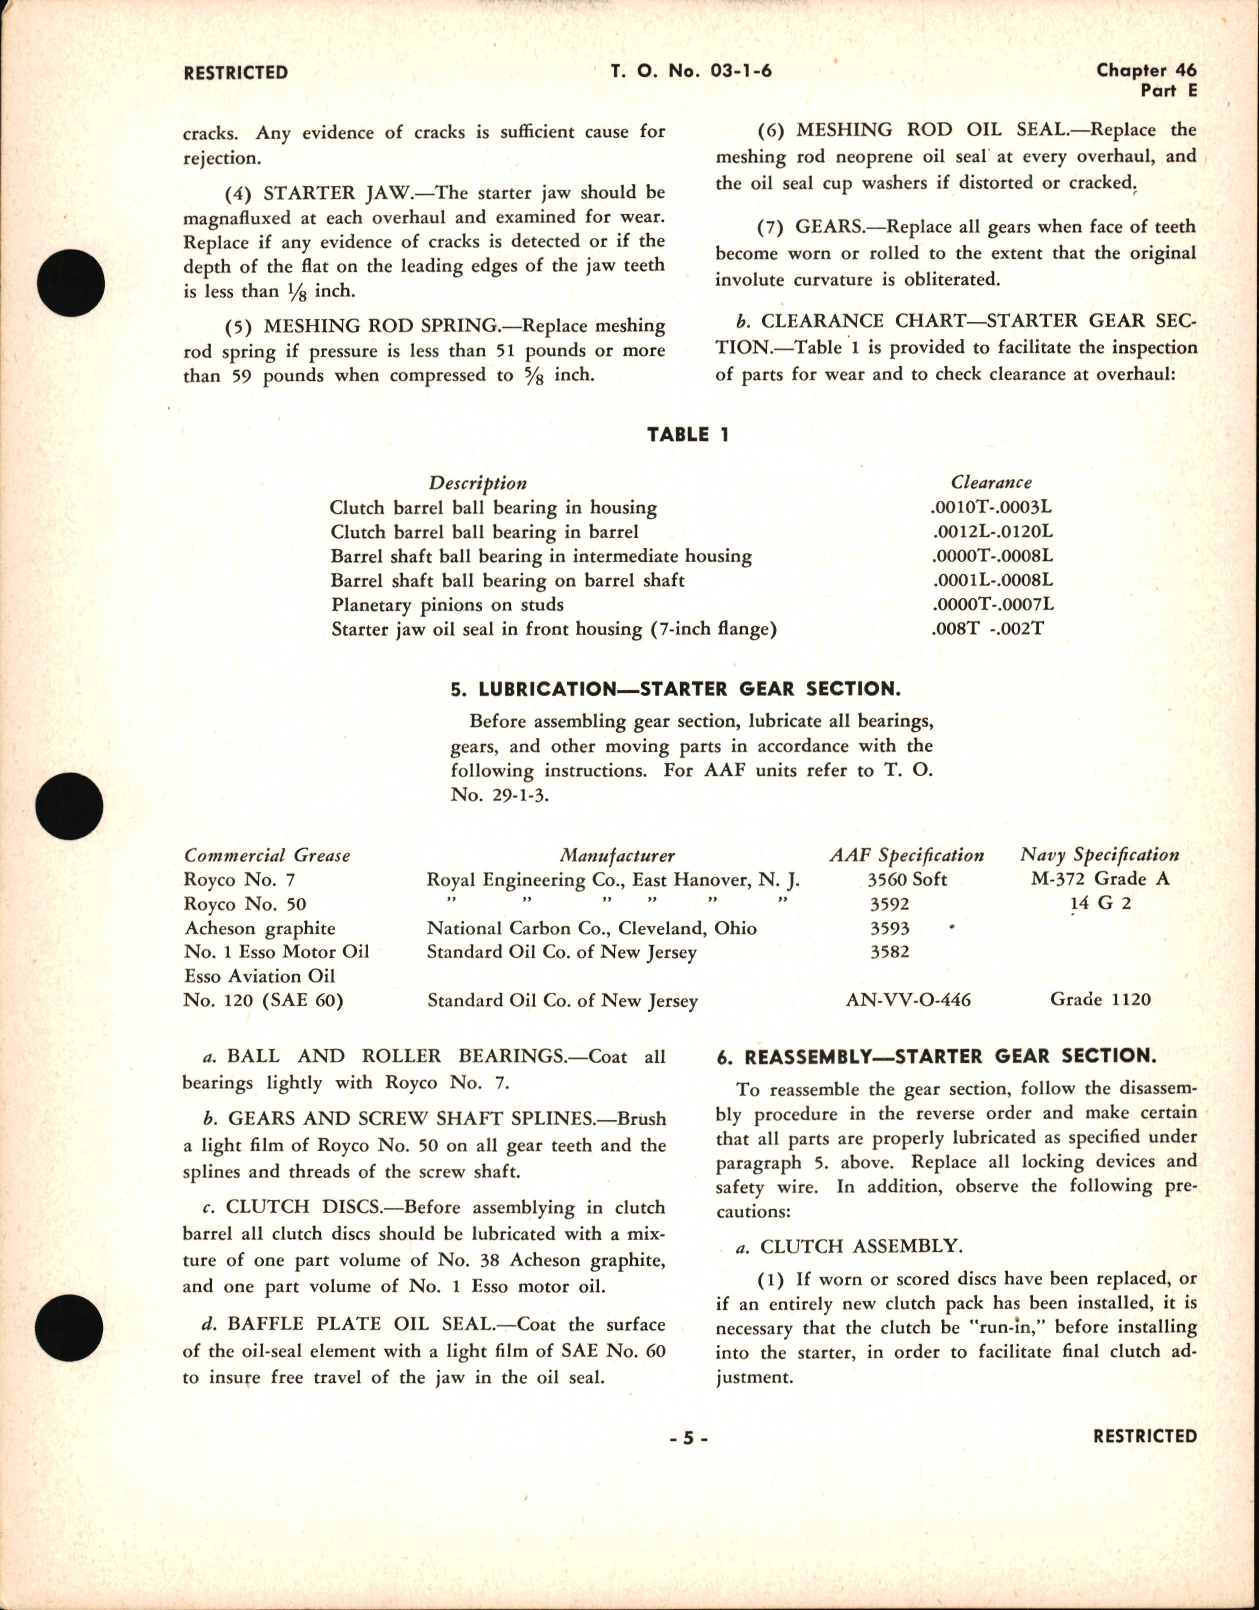 Sample page 5 from AirCorps Library document: Overhaul Instructions for Direct Cranking Electric Starters, Chapter 46 Part E